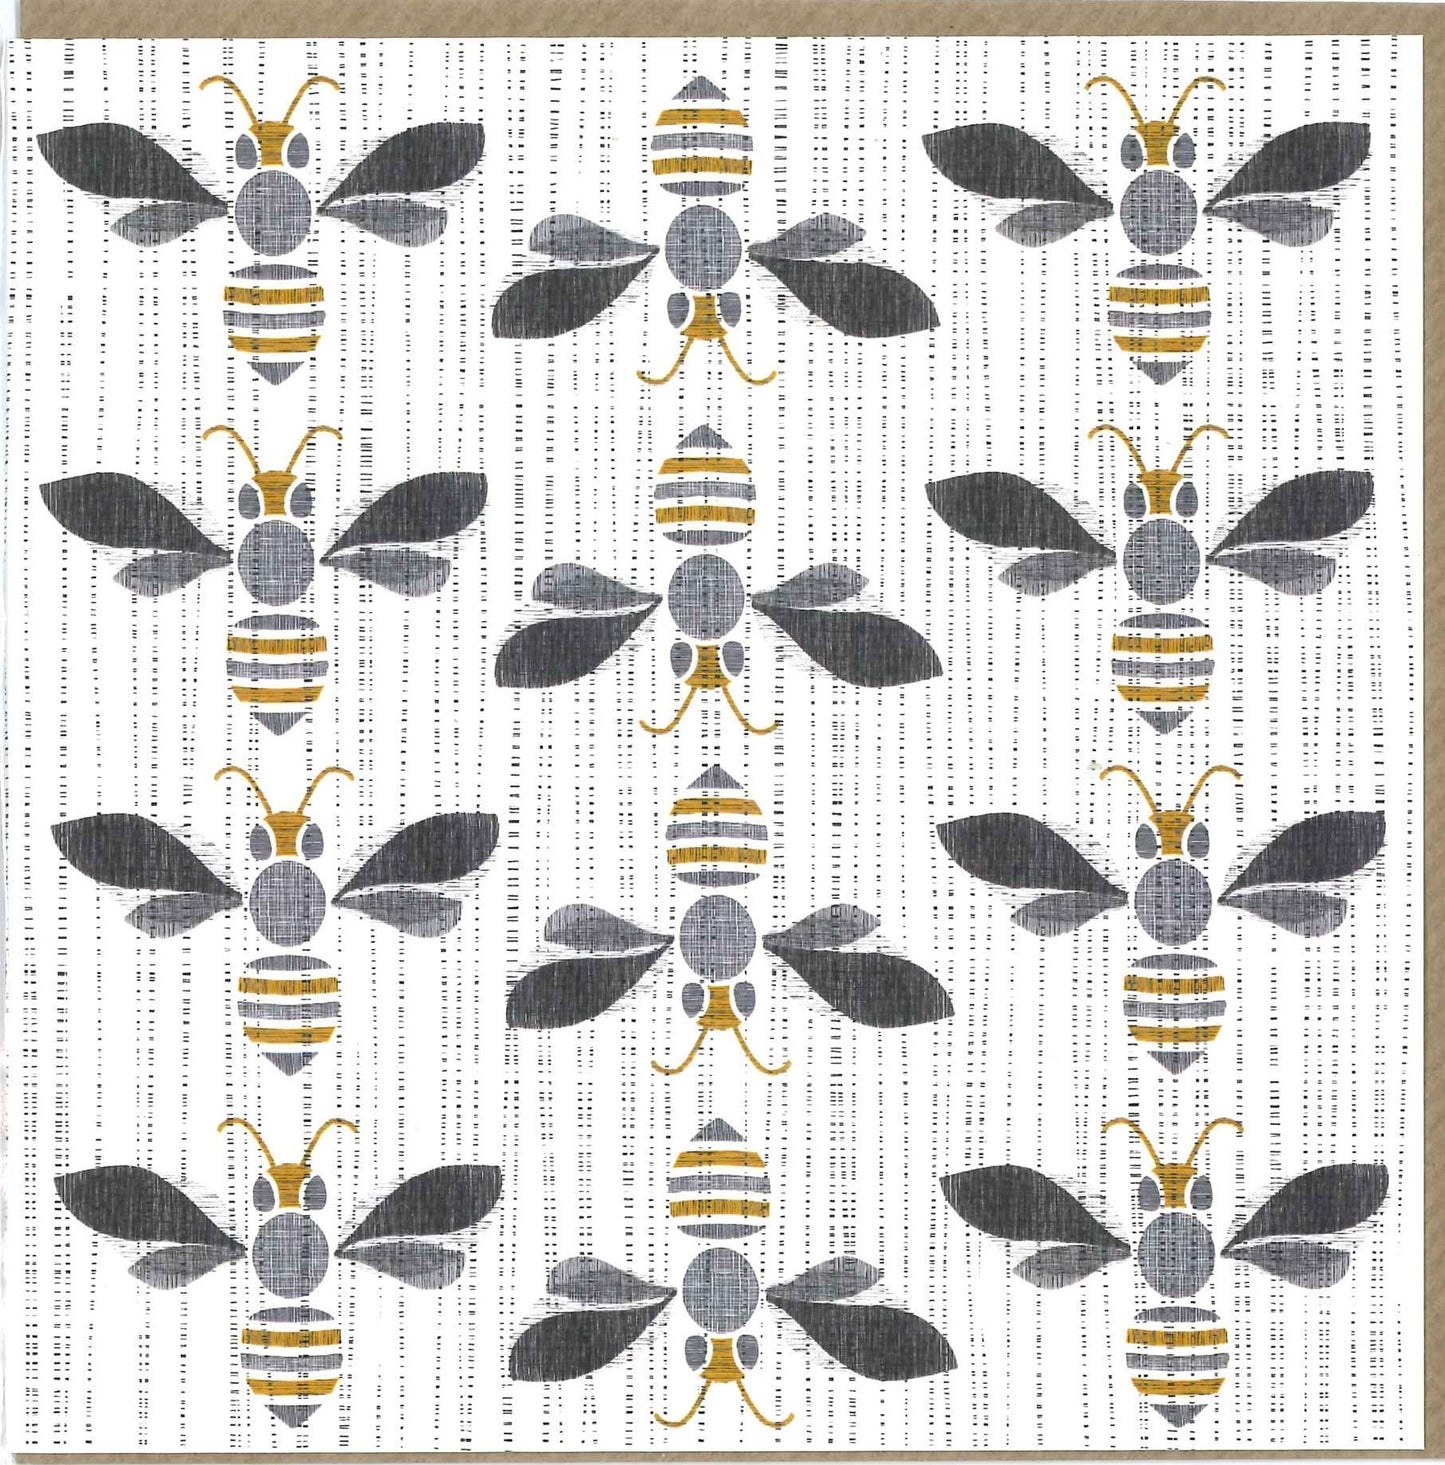 Square card with design of bees in three rows. Grey, black, gold tones.